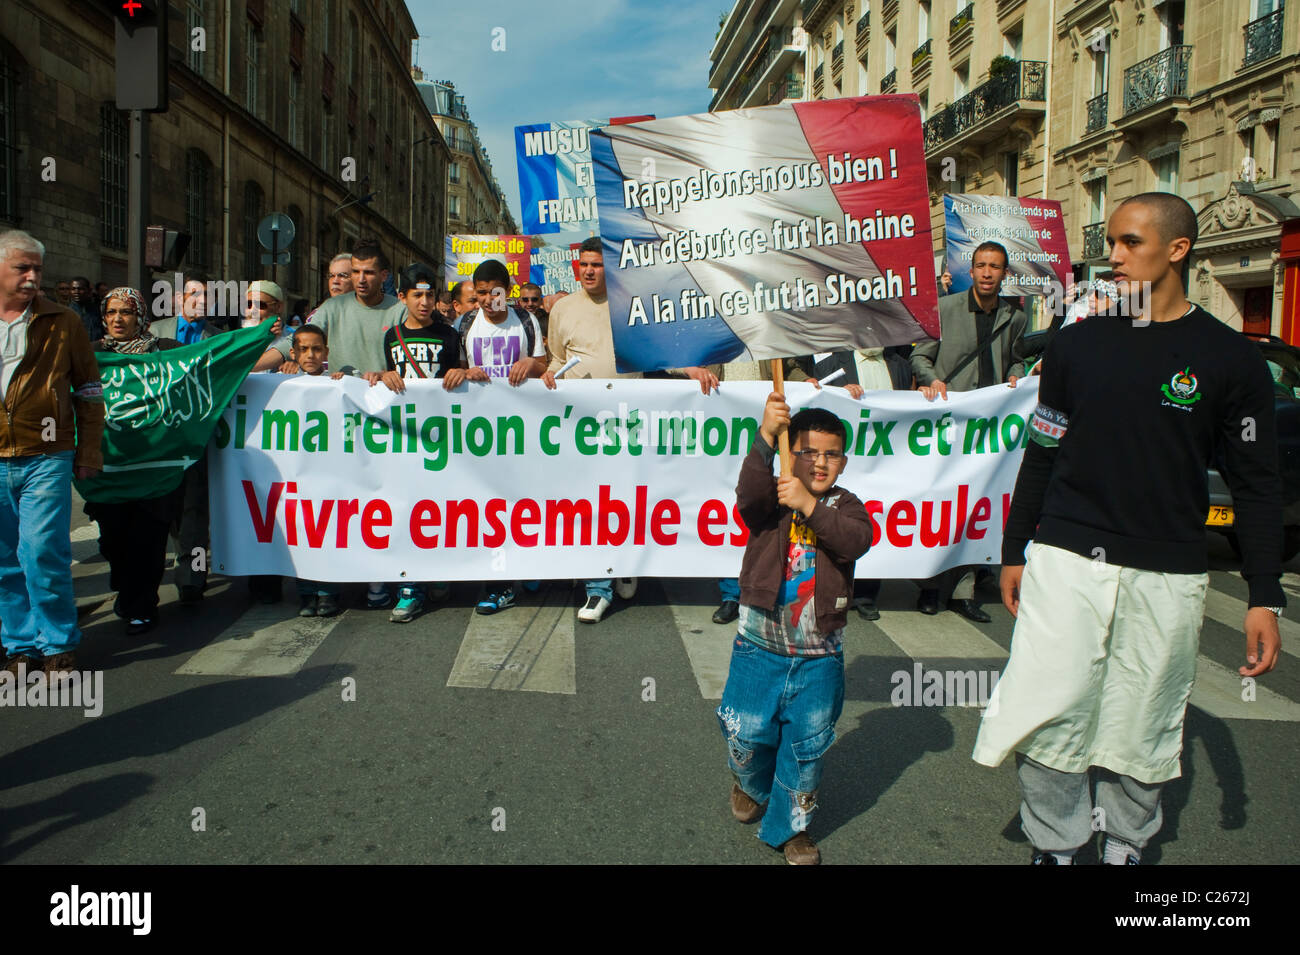 Paris, France, Muslim Groups Demonstrating Against Islamophobie, Banner, Young Boy Holding Protest sign on Street anti discrimination Stock Photo